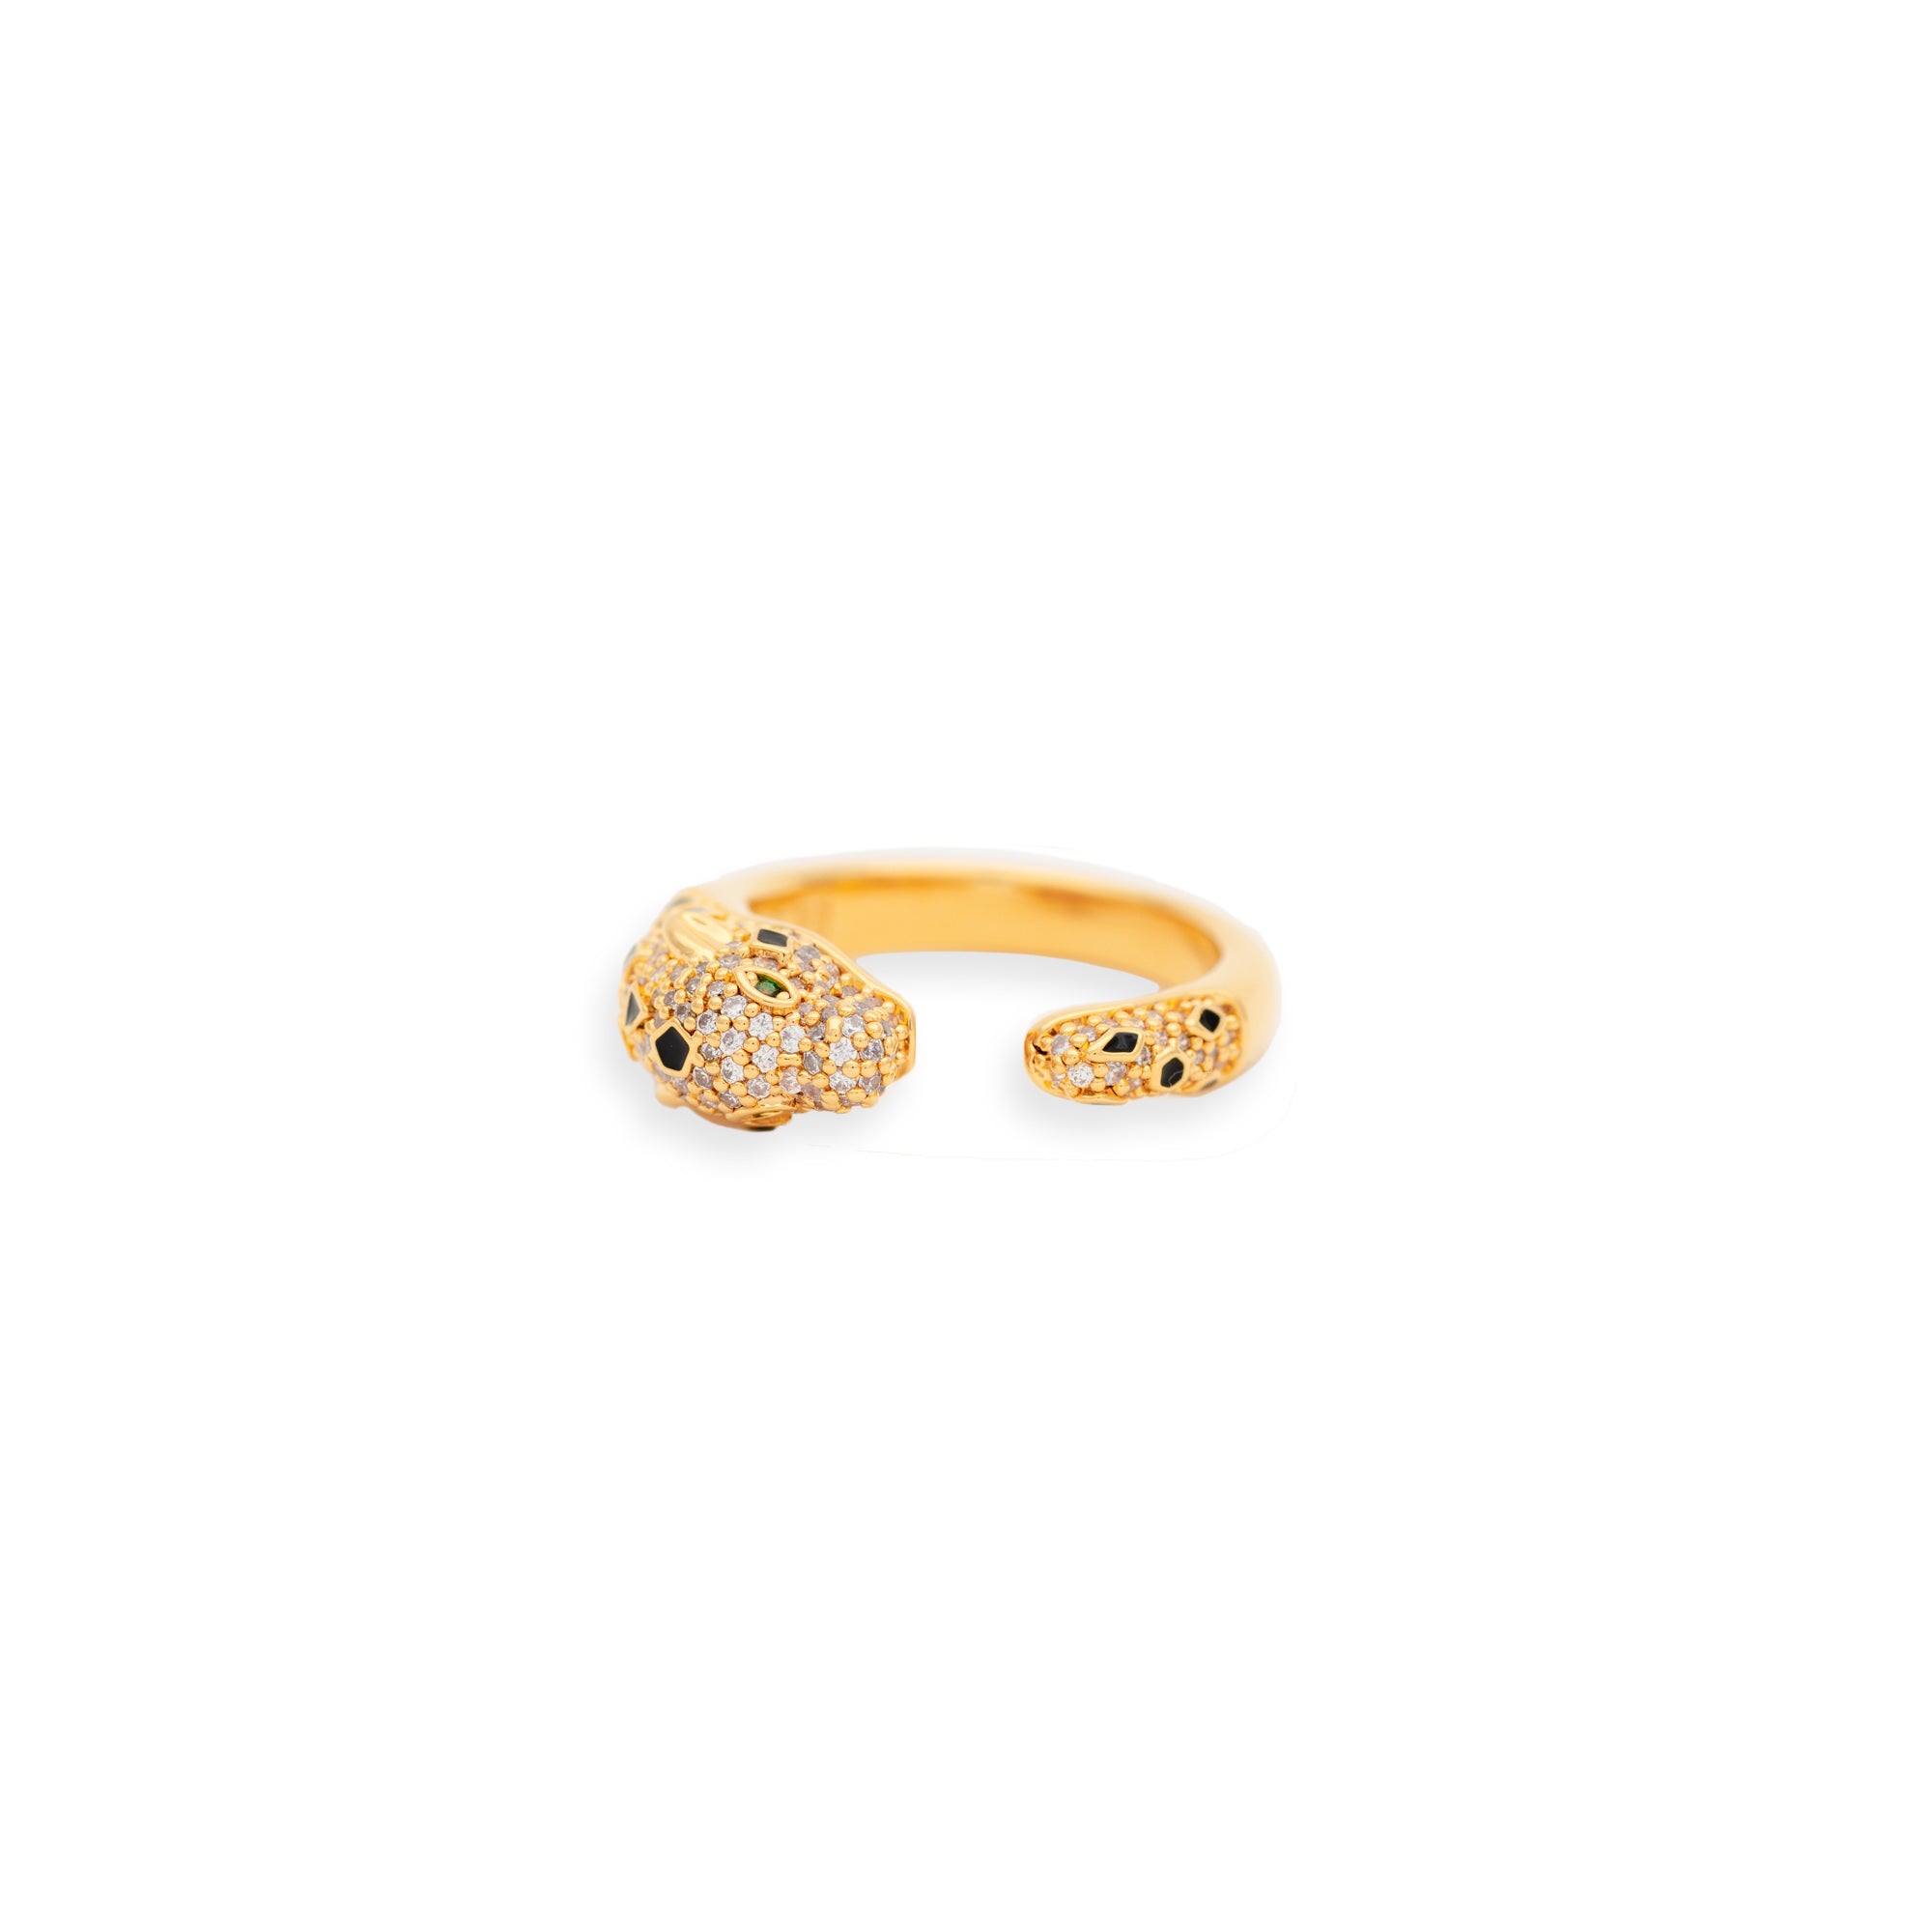 McJaguar Ring by Erin Fader Jewelry 